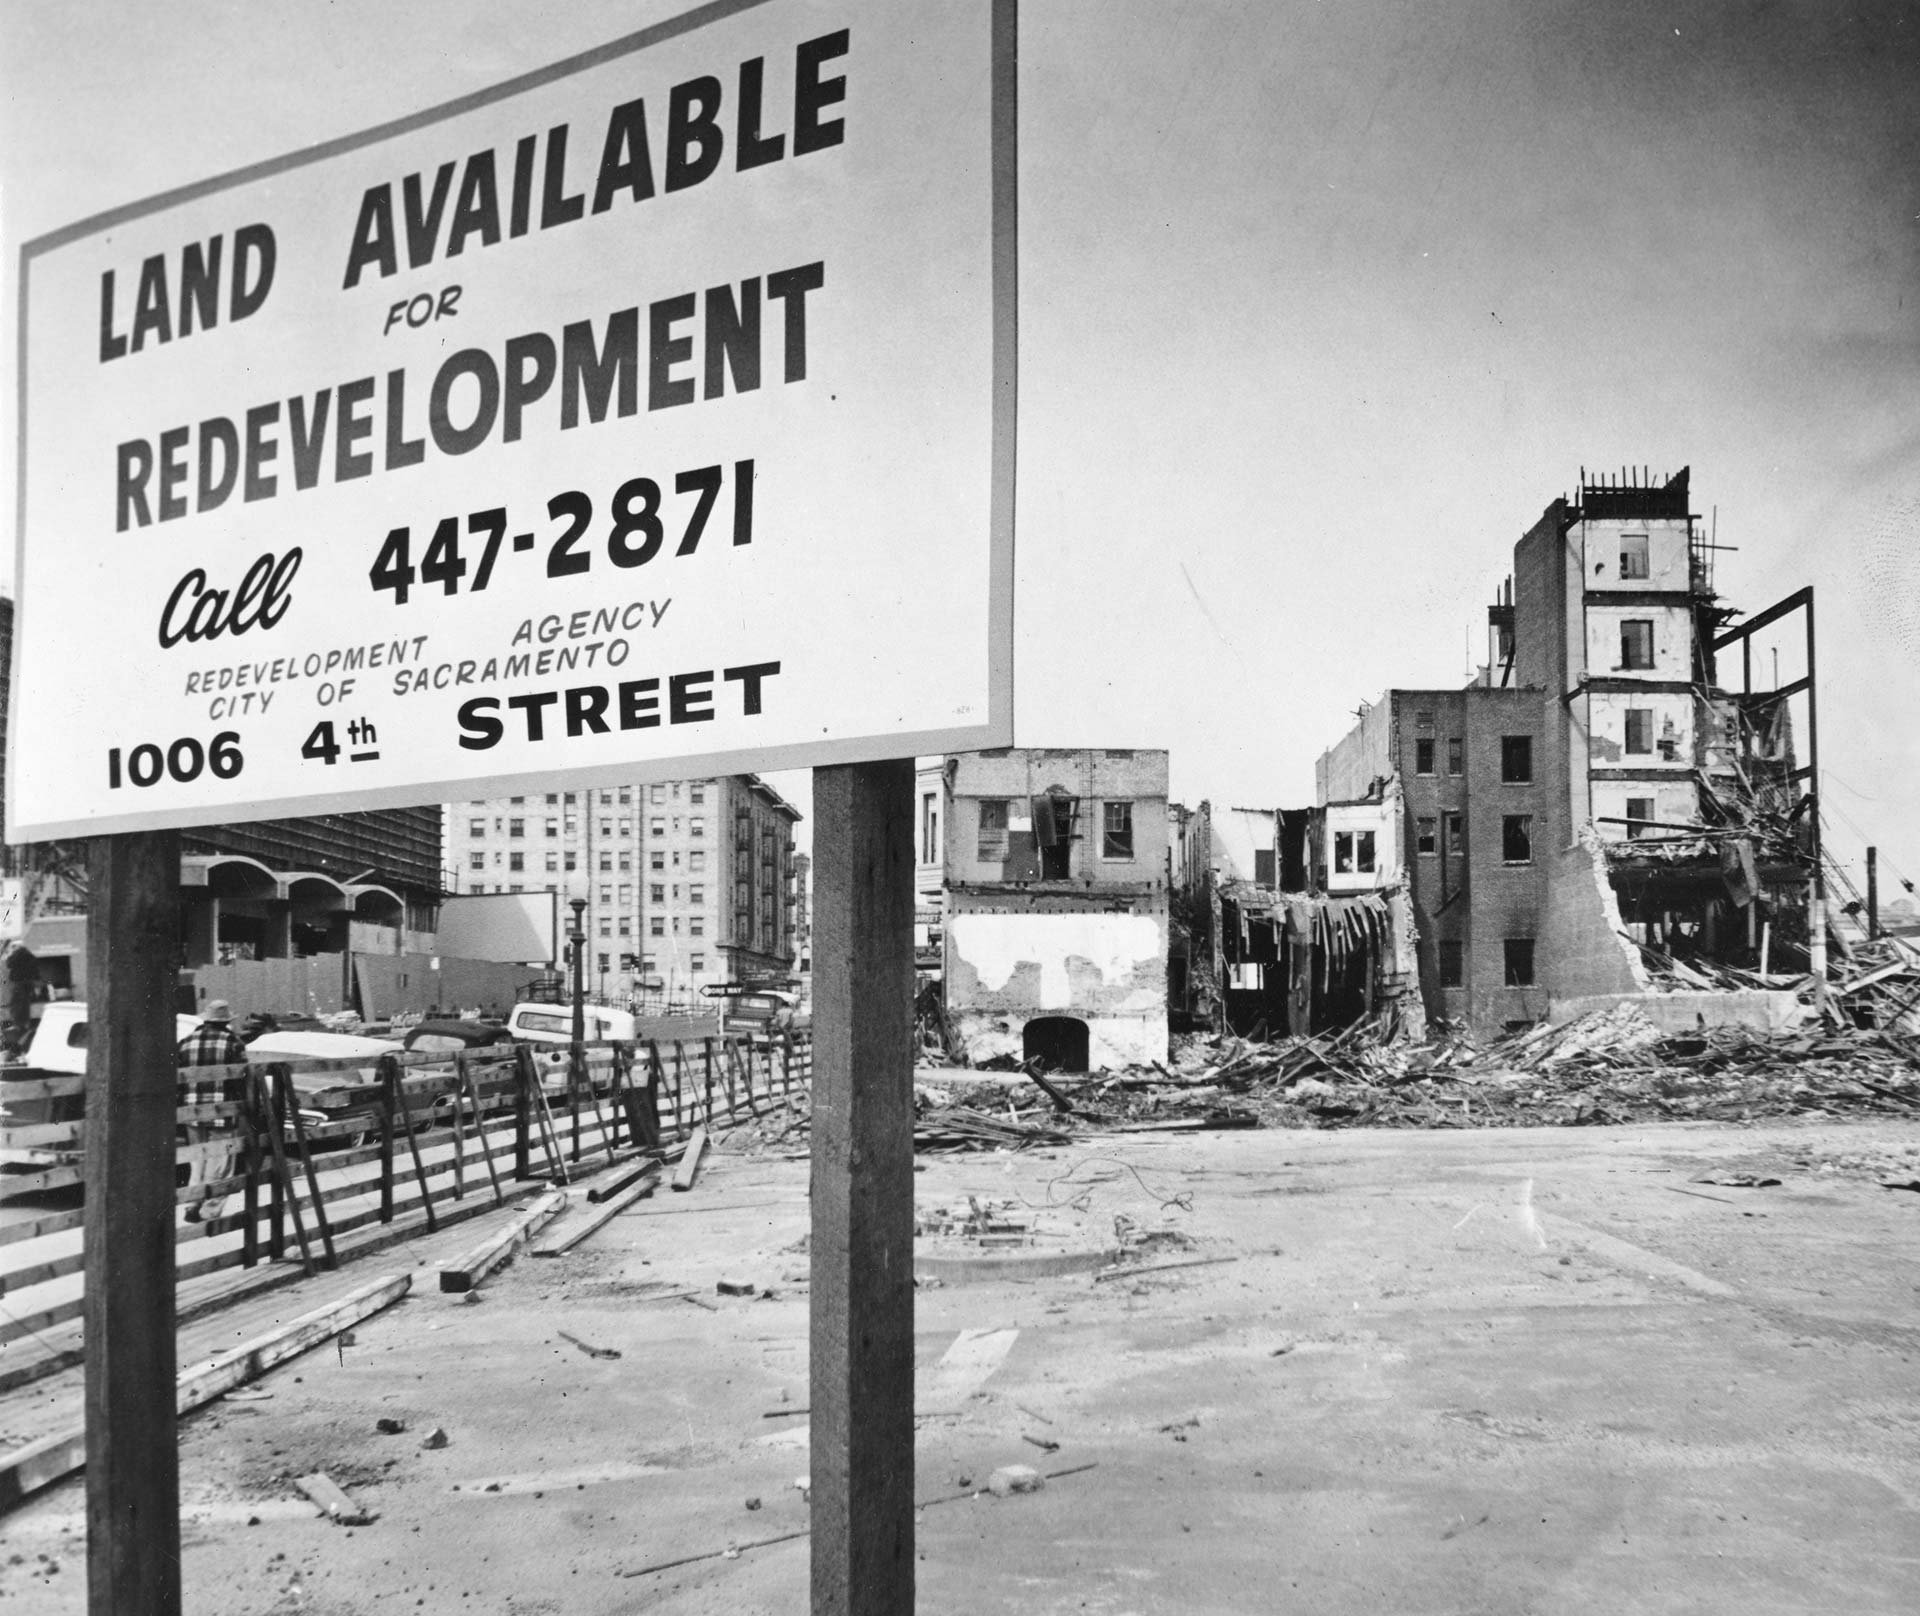 Black and white photo showing a large sign put up in front of a vacant lot. The sign reads "Land Available for Redevelopment" and gives a phone number and address. Buildings toward the back of the lot are undergoing various stages of demolition.